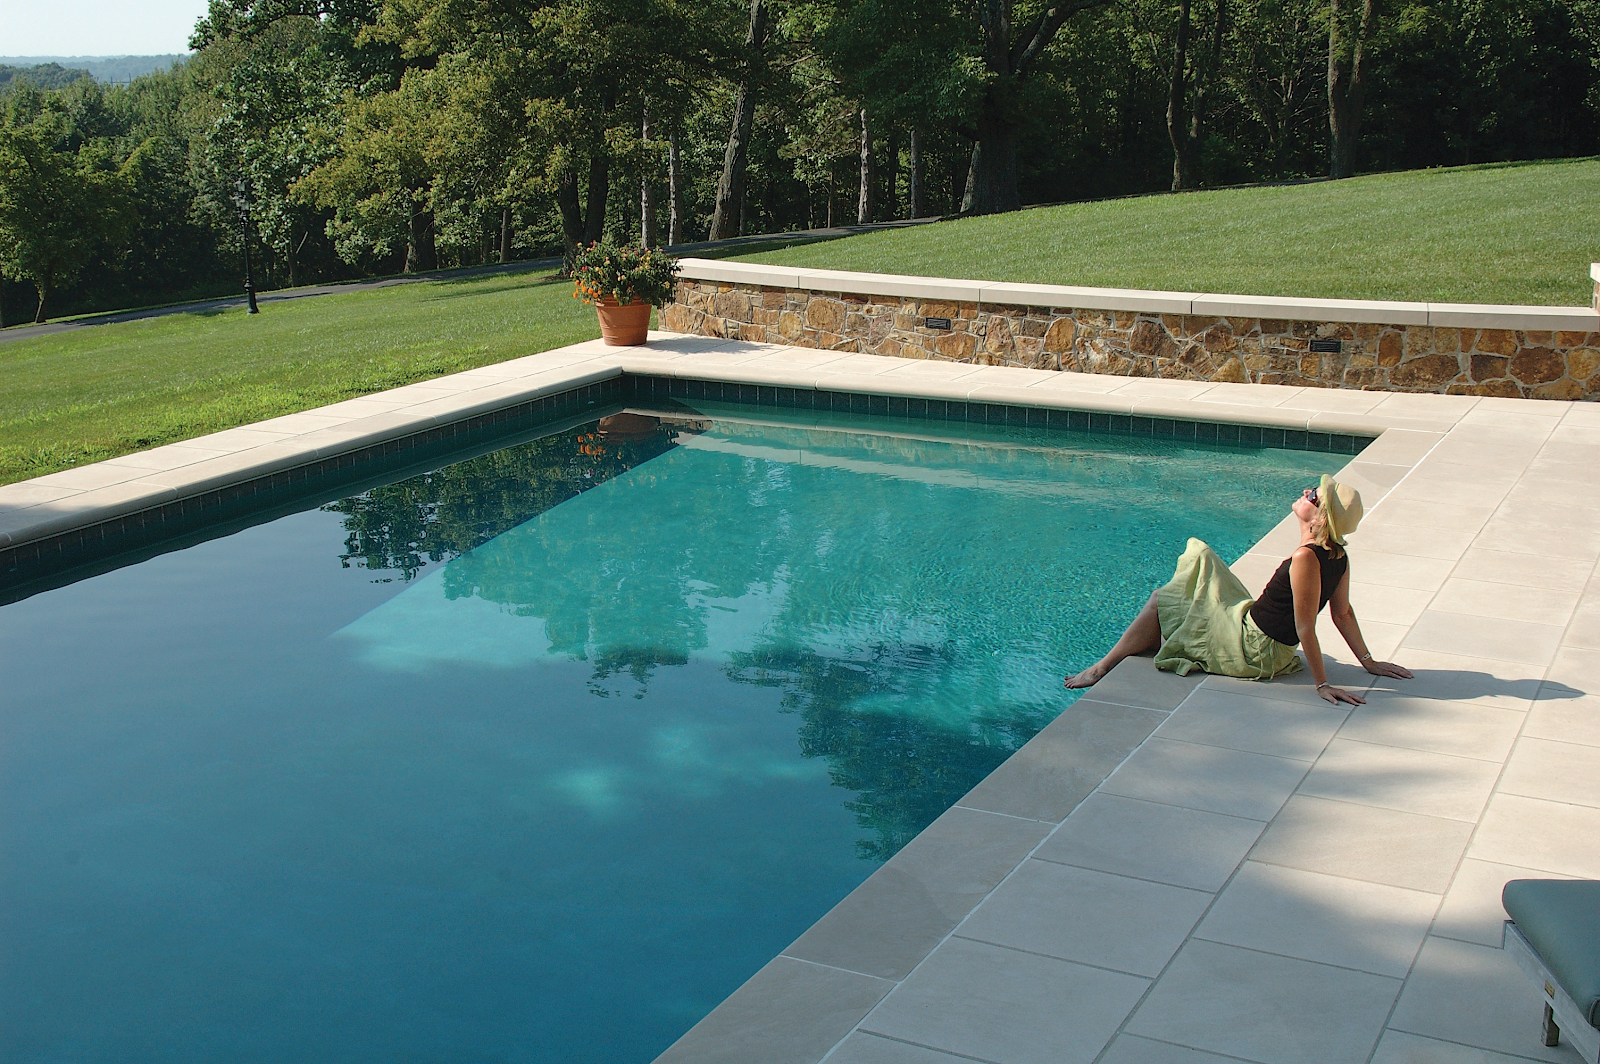 Indiana Limestone - Full Color Blend pavers and pool coping